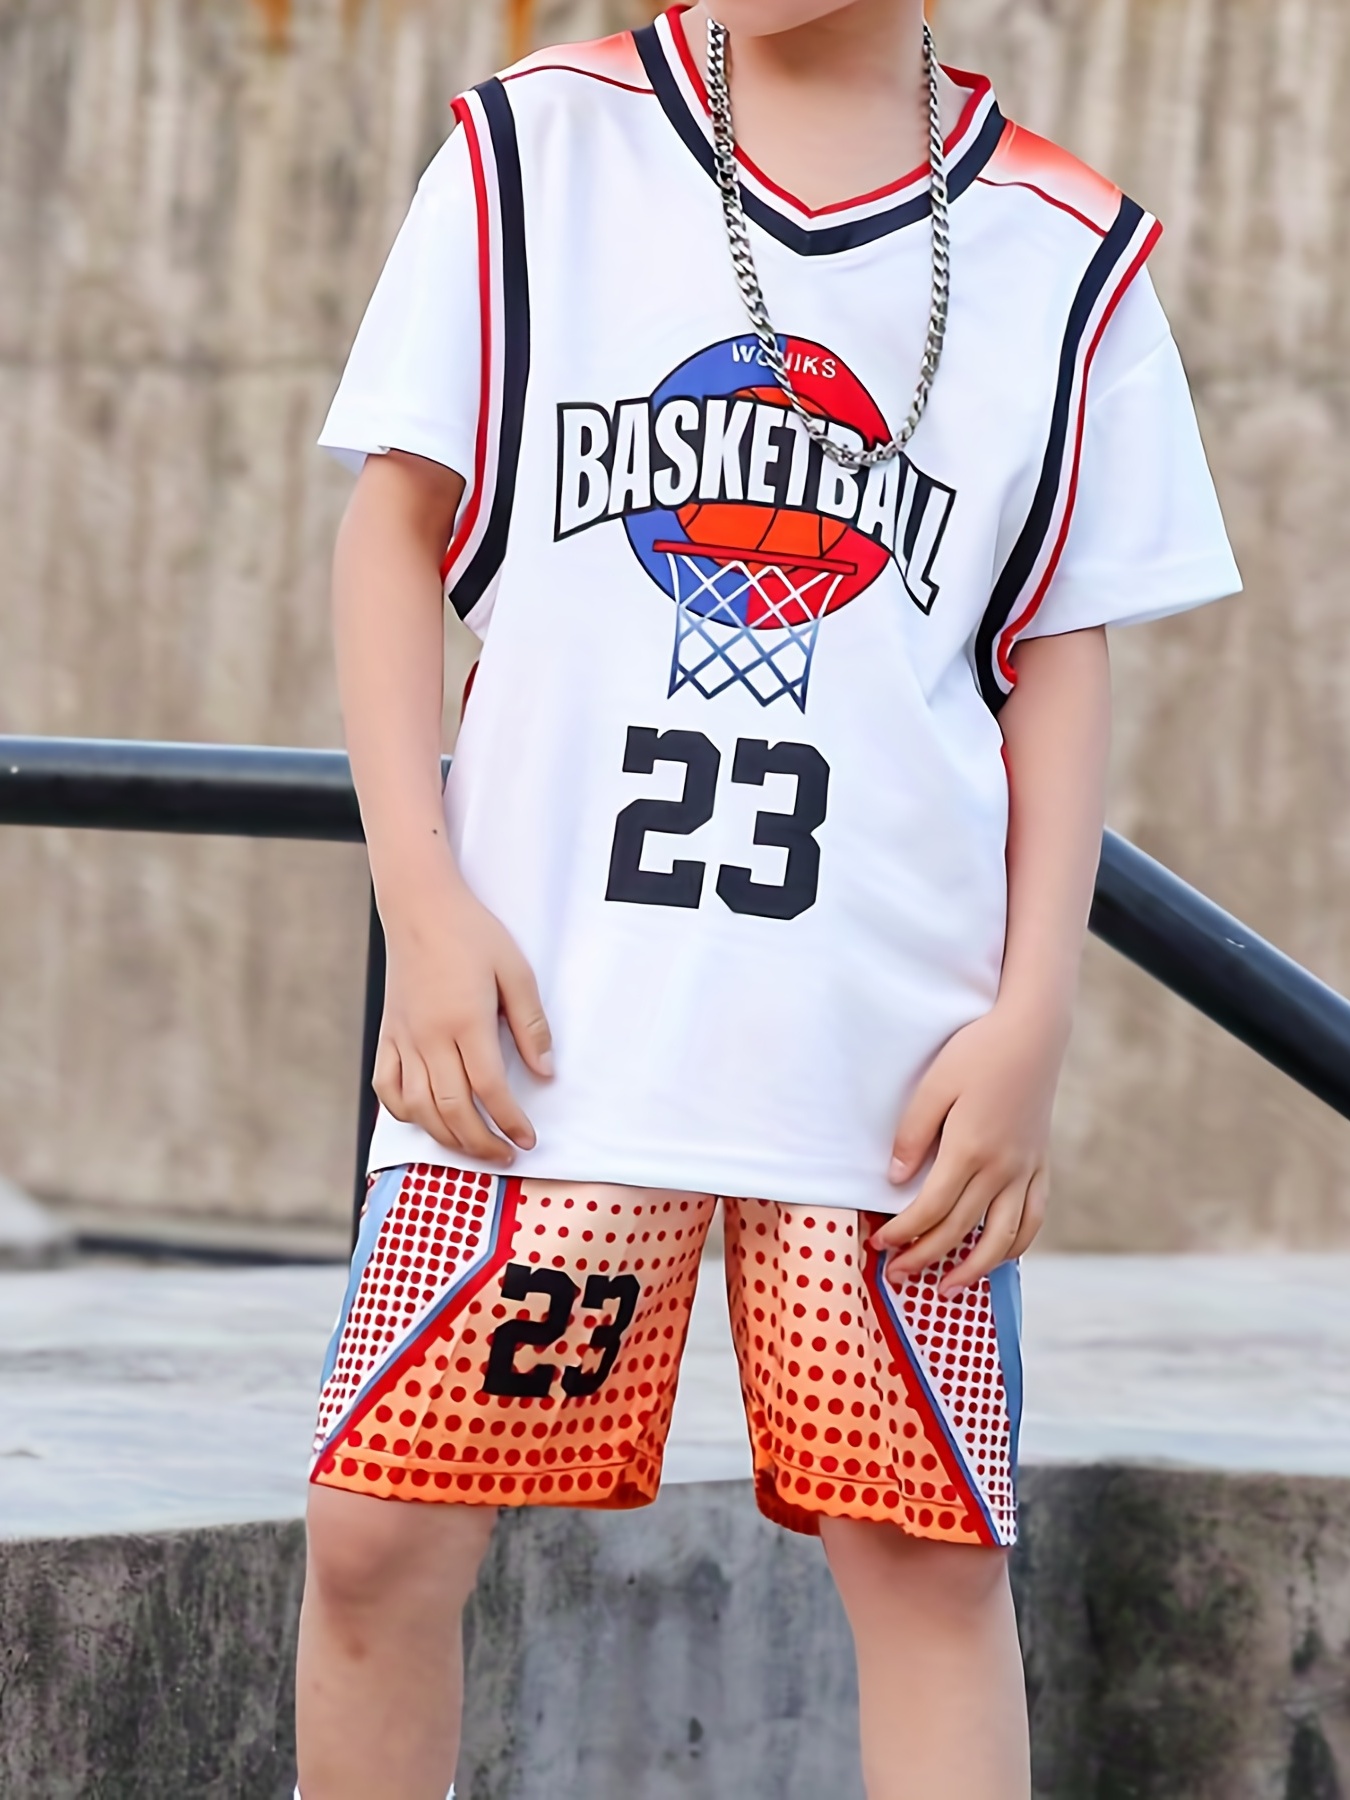 Boys Summer Quick-dry Basketball Jersey Sports Short Sleeve Suits